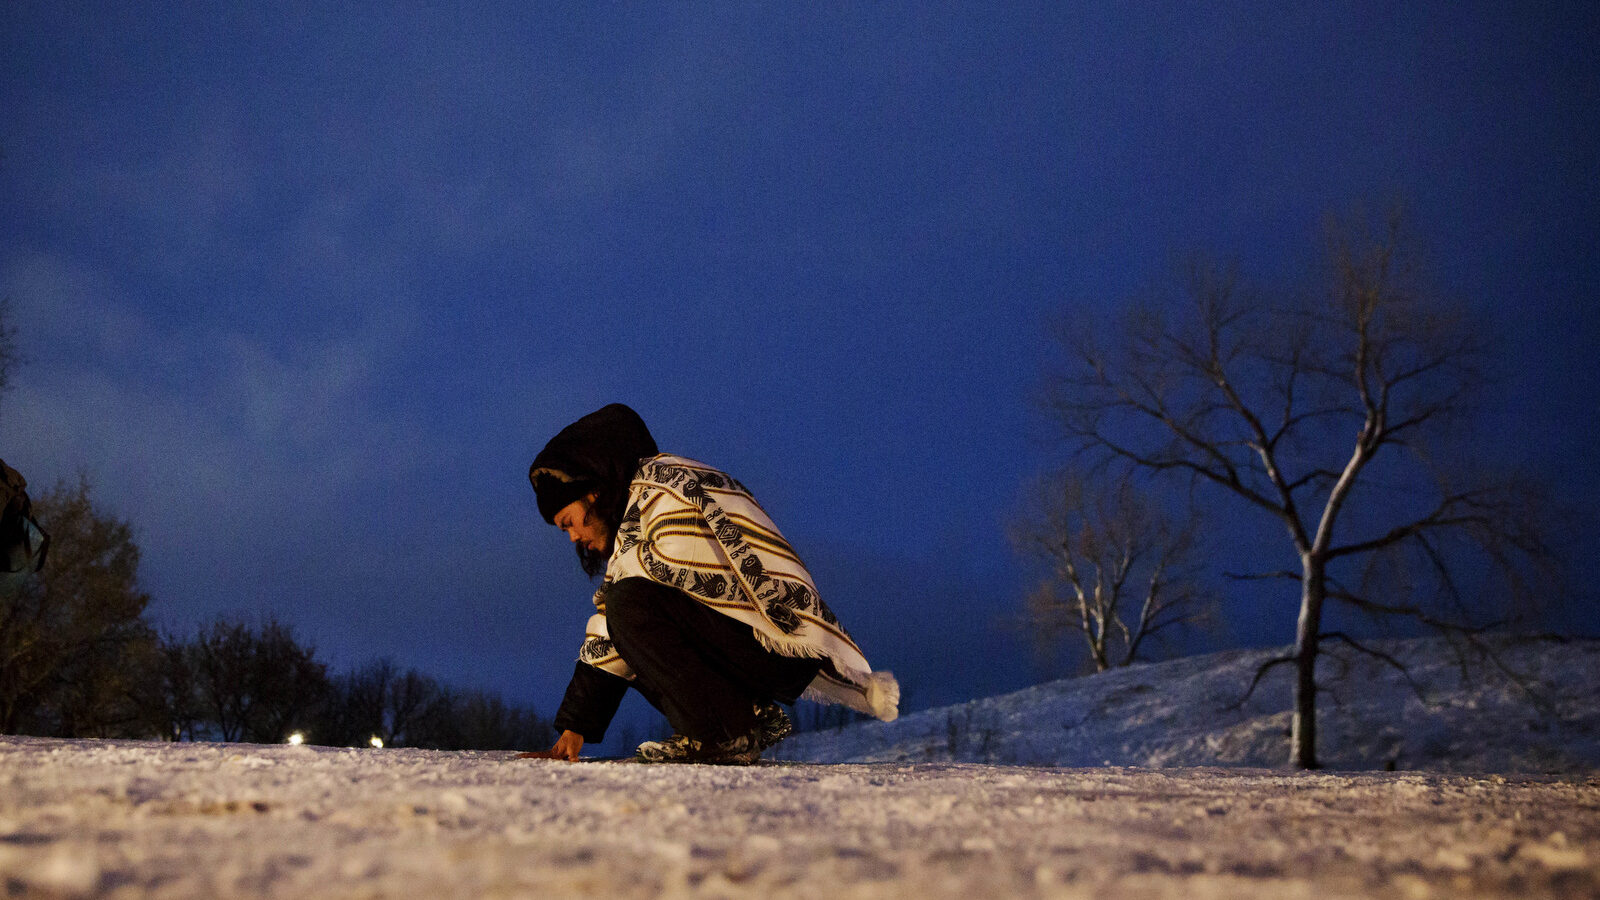 Sean Ptolomek, of Los Angeles, prays while touching the road leading to the Dakota Access oil pipeline site following a demonstration near Cannon Ball, N.D., Wednesday, Nov. 30, 2016. The pipeline is designed to carry oil from North Dakota to Illinois. Opponents, including the Standing Rock Sioux tribe, say it will harm drinking water and cultural sites. (AP Photo/David Goldman)